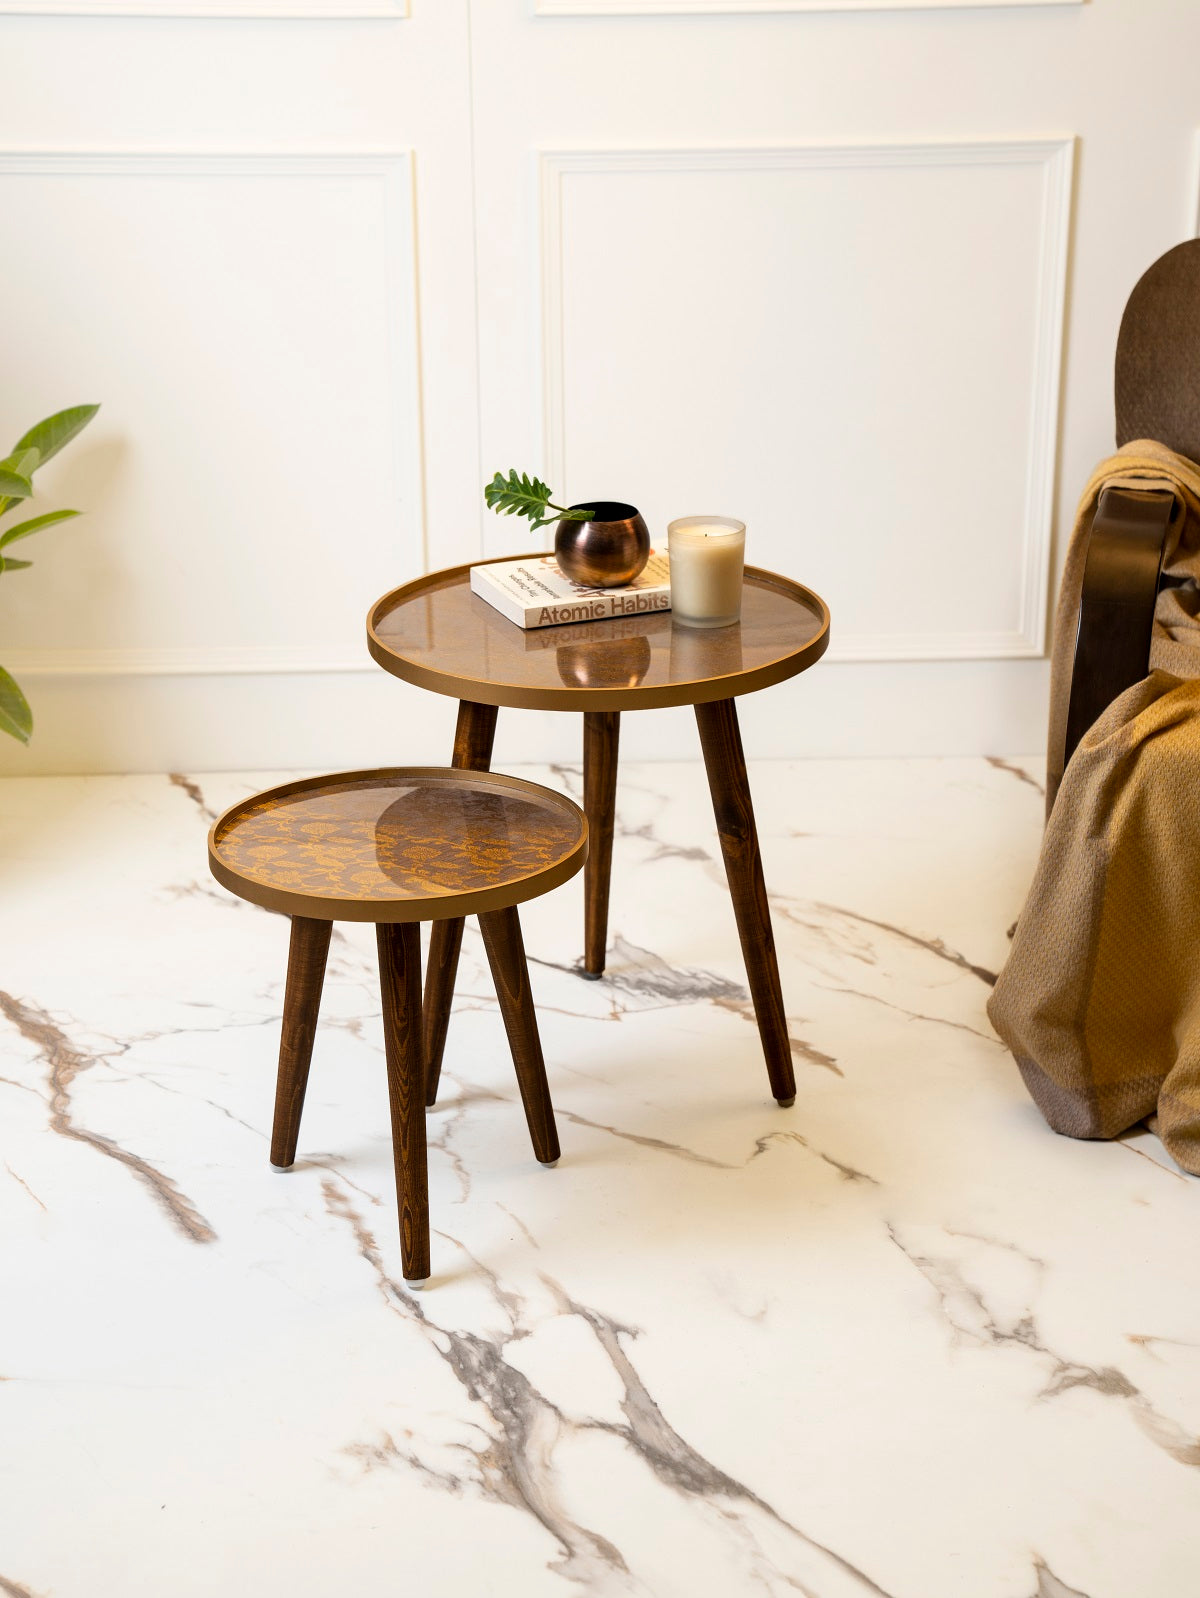 Bela Round Nesting Tables with Wooden Legs, Side Tables, Wooden Tables, Living Room Decor by A Tiny Mistake